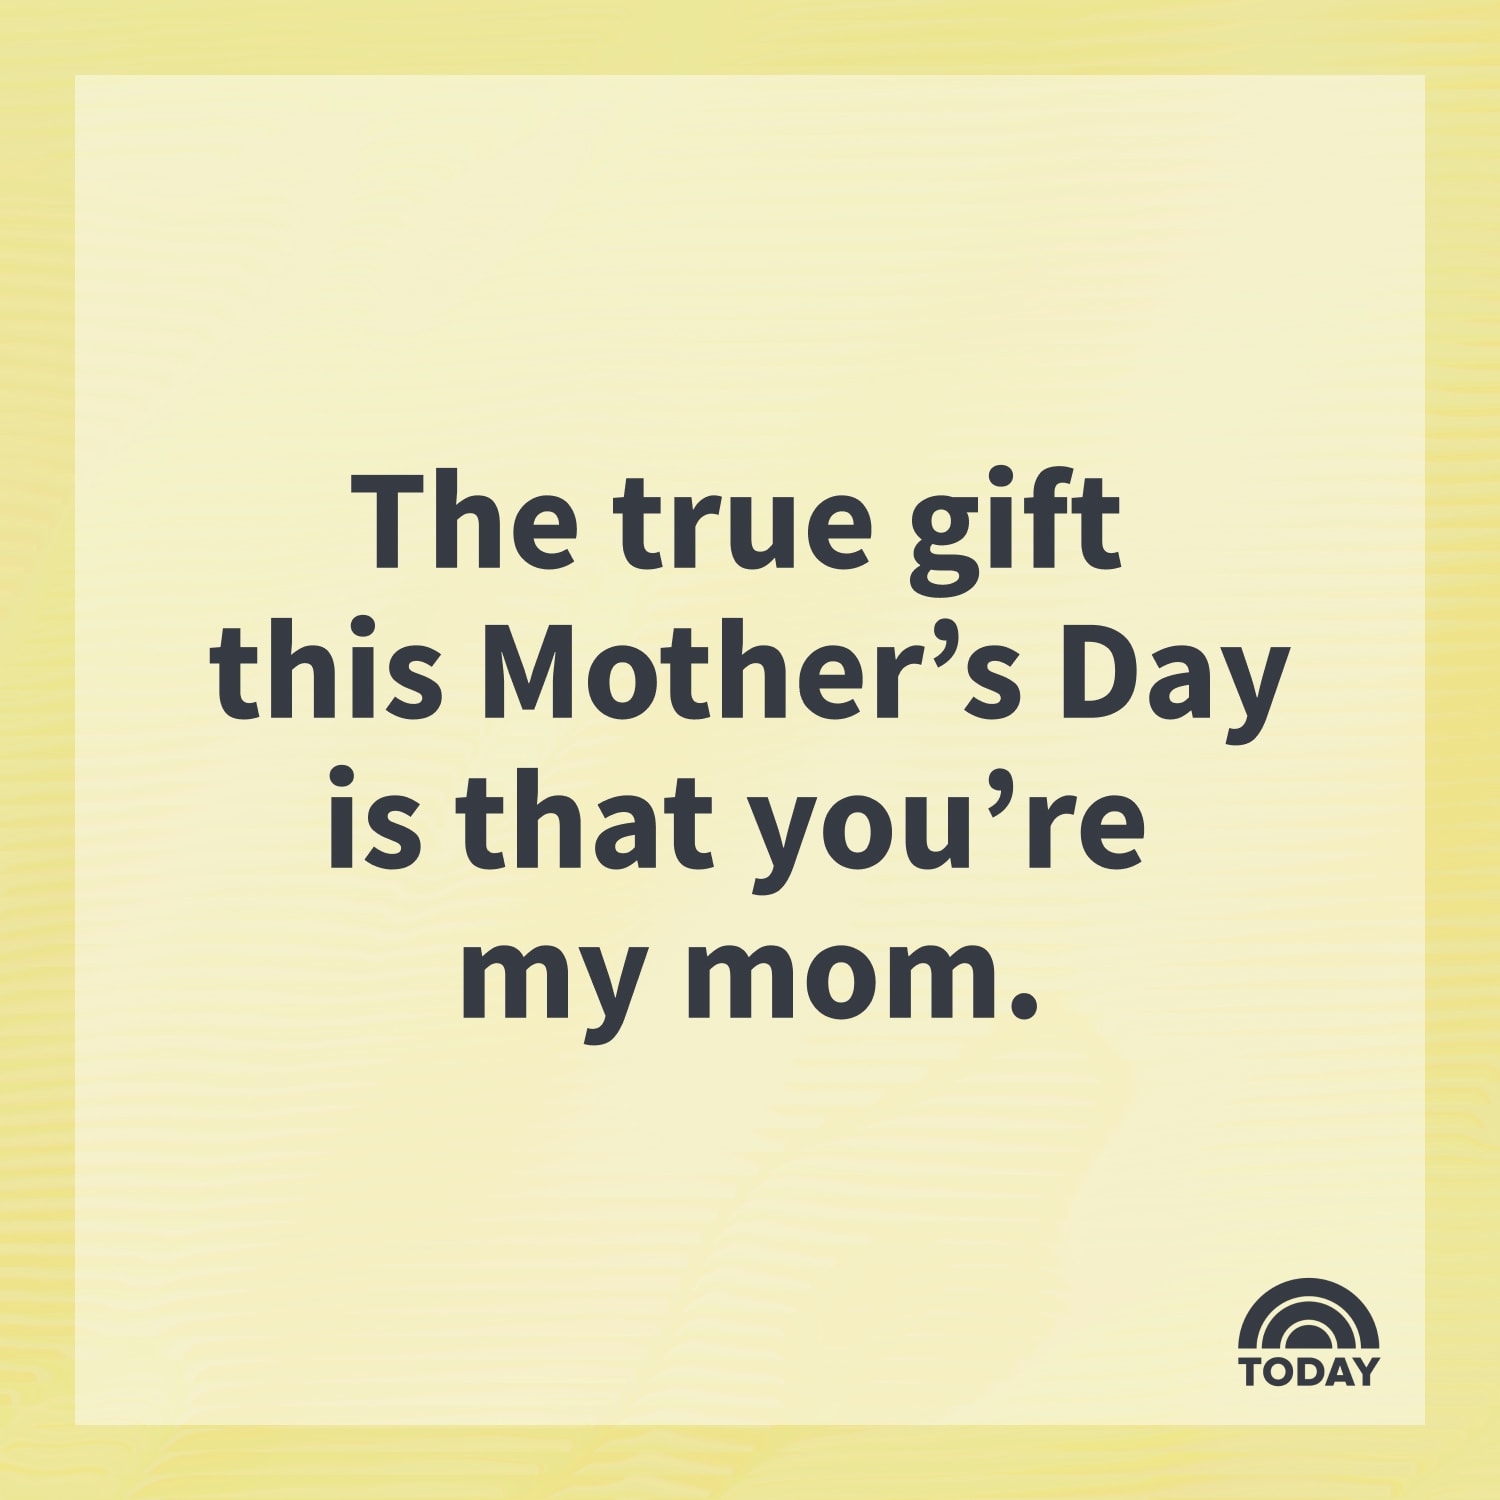 https://media-cldnry.s-nbcnews.com/image/upload/rockcms/2023-05/mothers-day-quotes-2-jp-230504-bae3ad.jpg